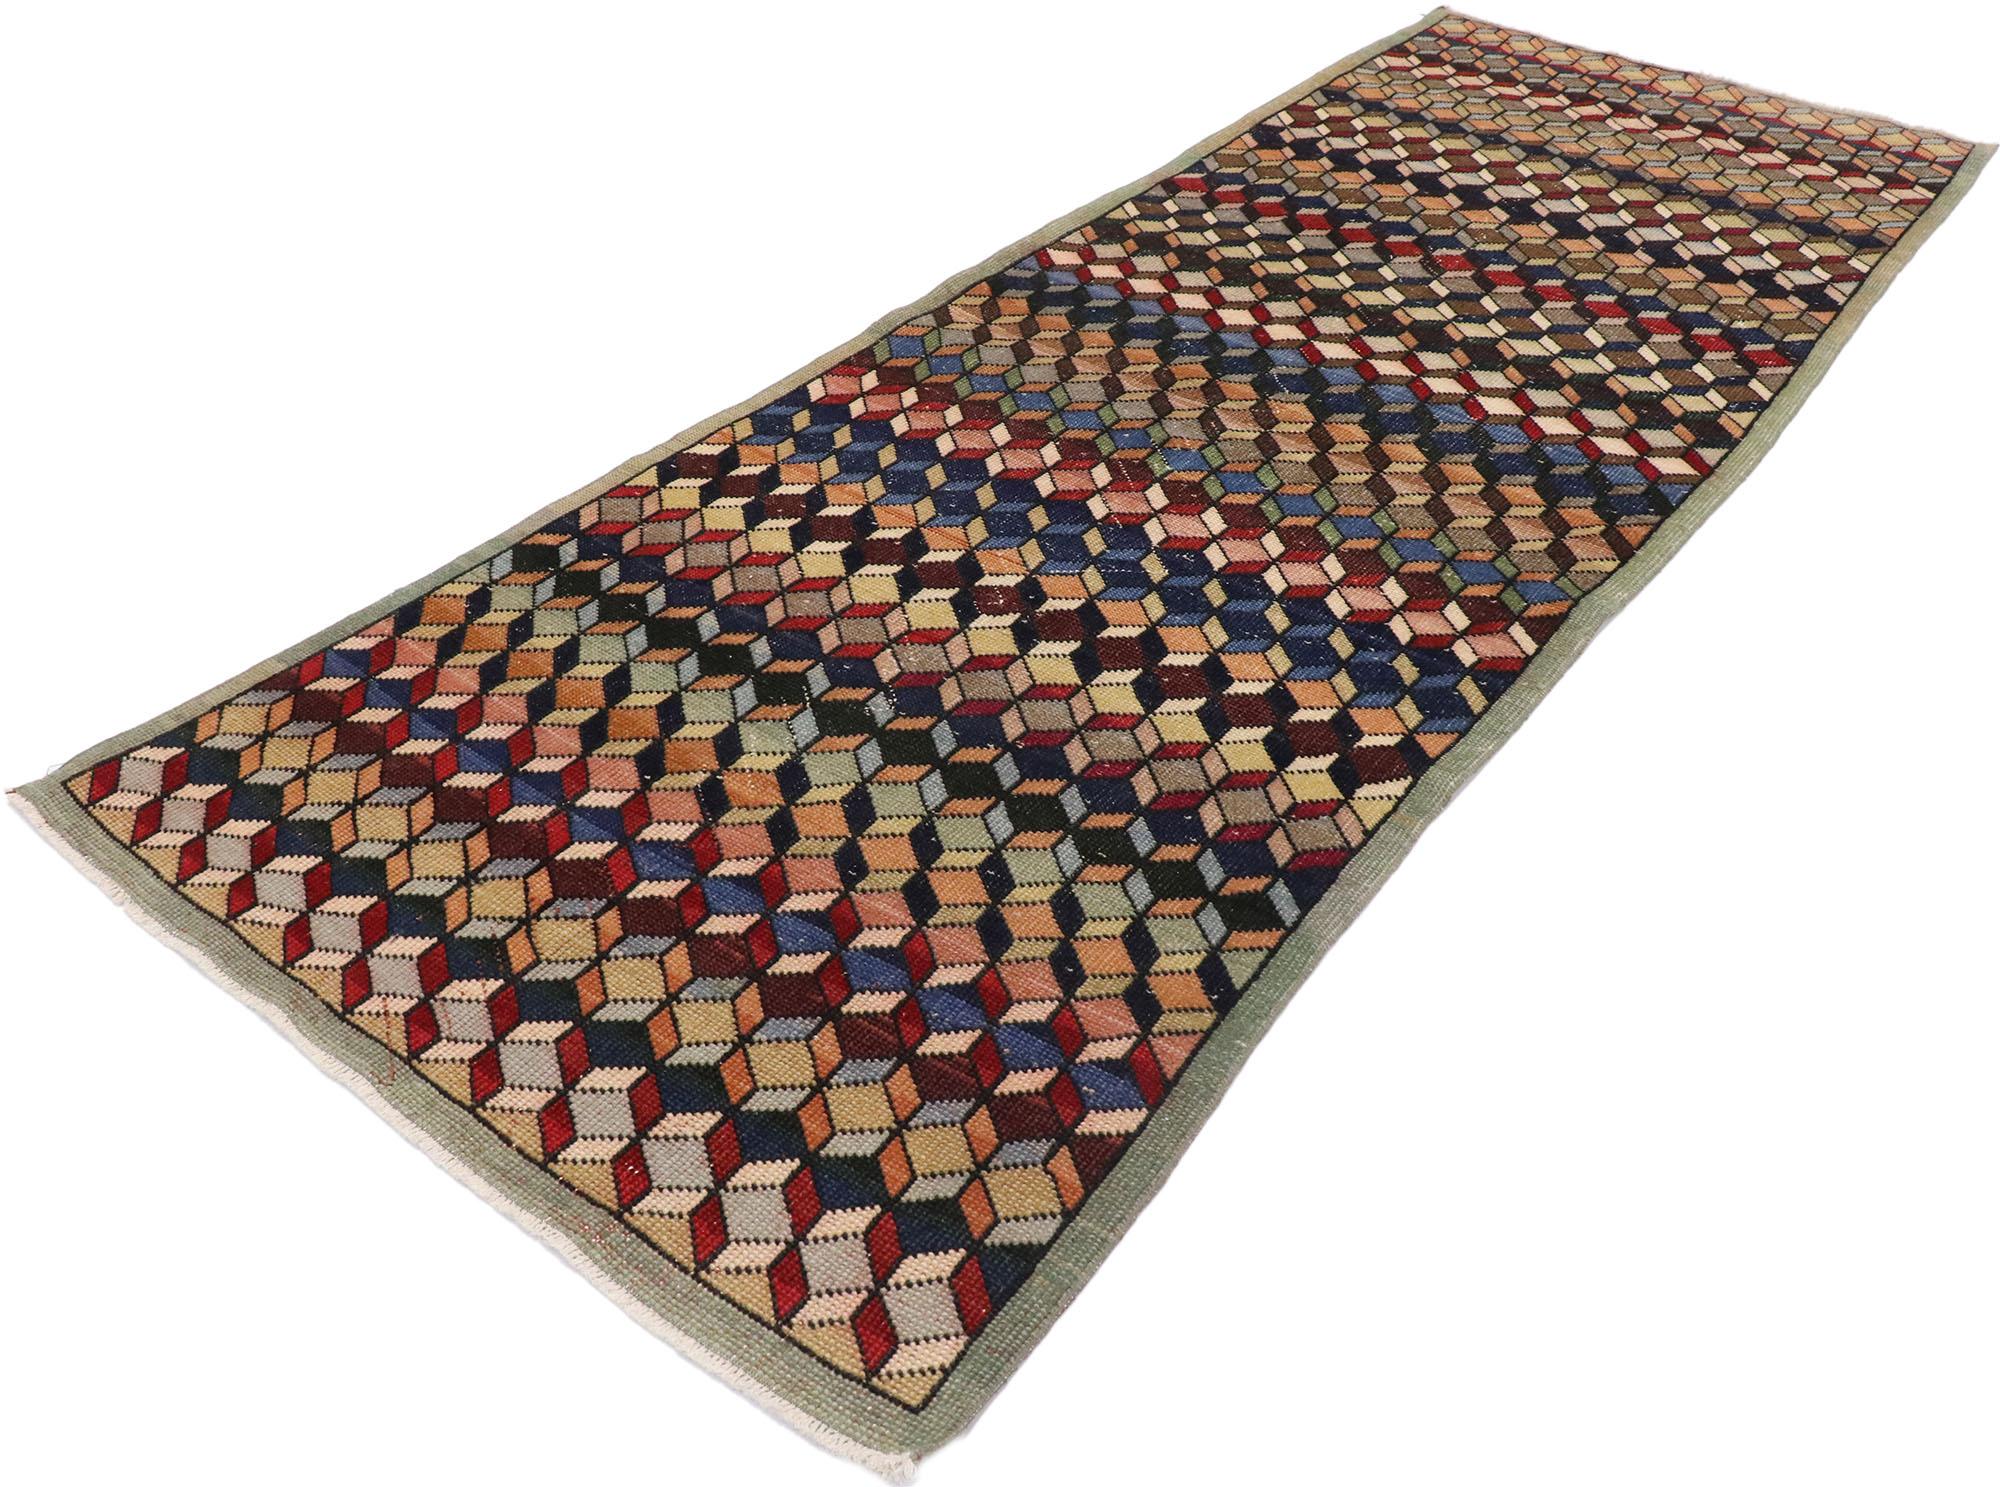 53359, vintage Turkish Sivas rug with Mid-Century Modern style. This hand knotted wool vintage Turkish Sivas rug features an all-over lattice pattern spread across an abrashed field. Tan and brick red parallelograms form a trellis that breaks the